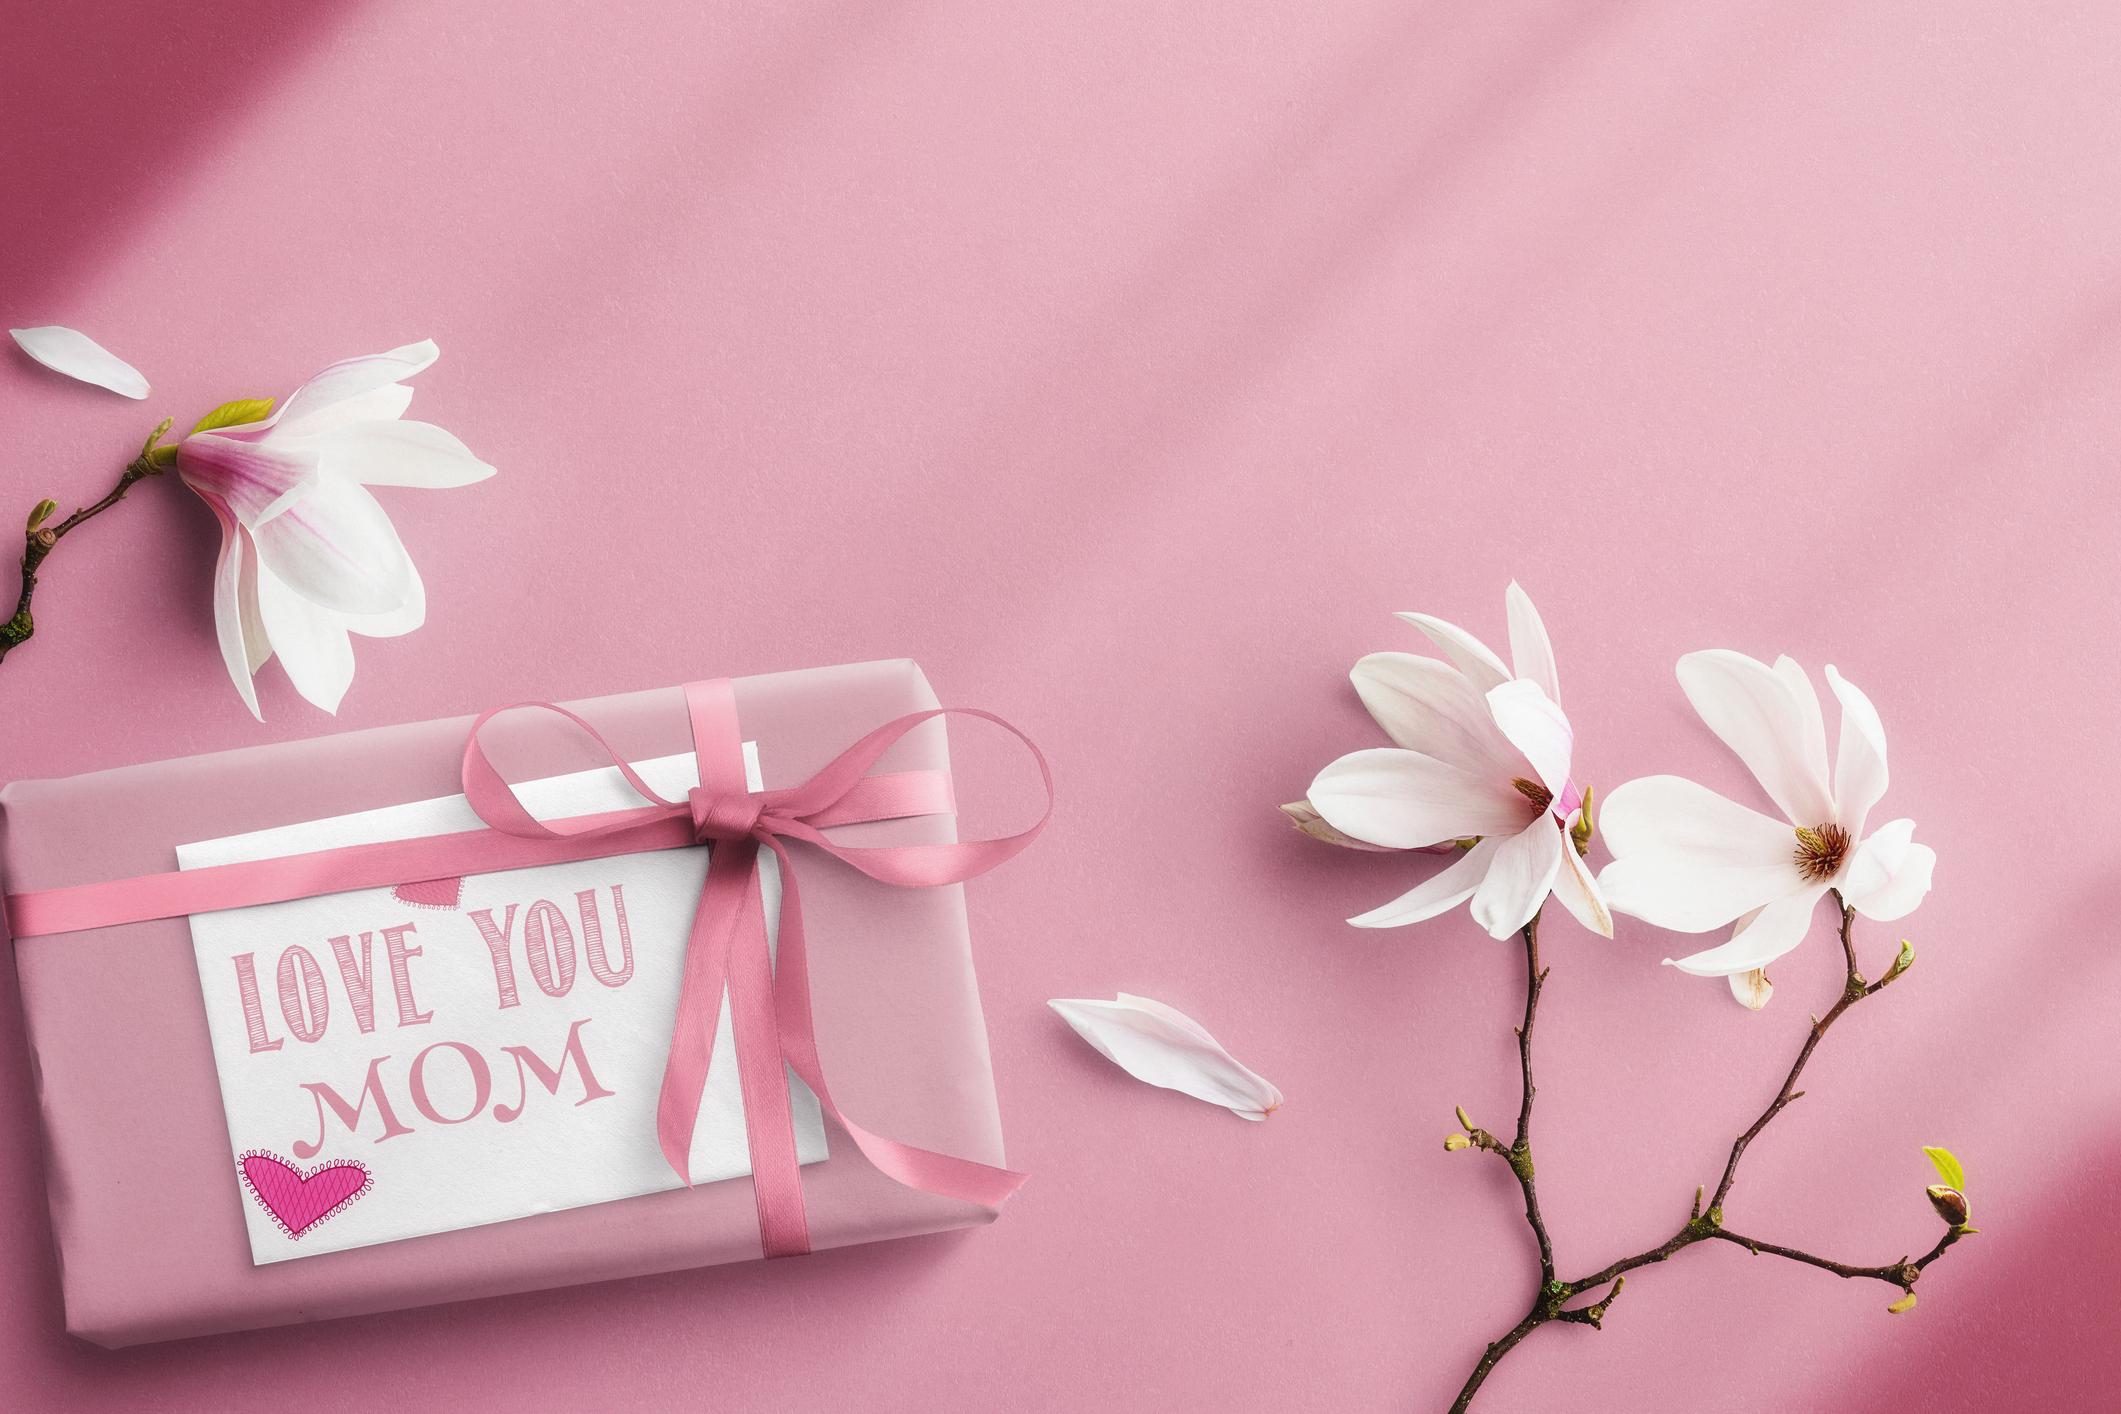  a pink gift parcel that says I love you mom, next to flowers on a pink background  